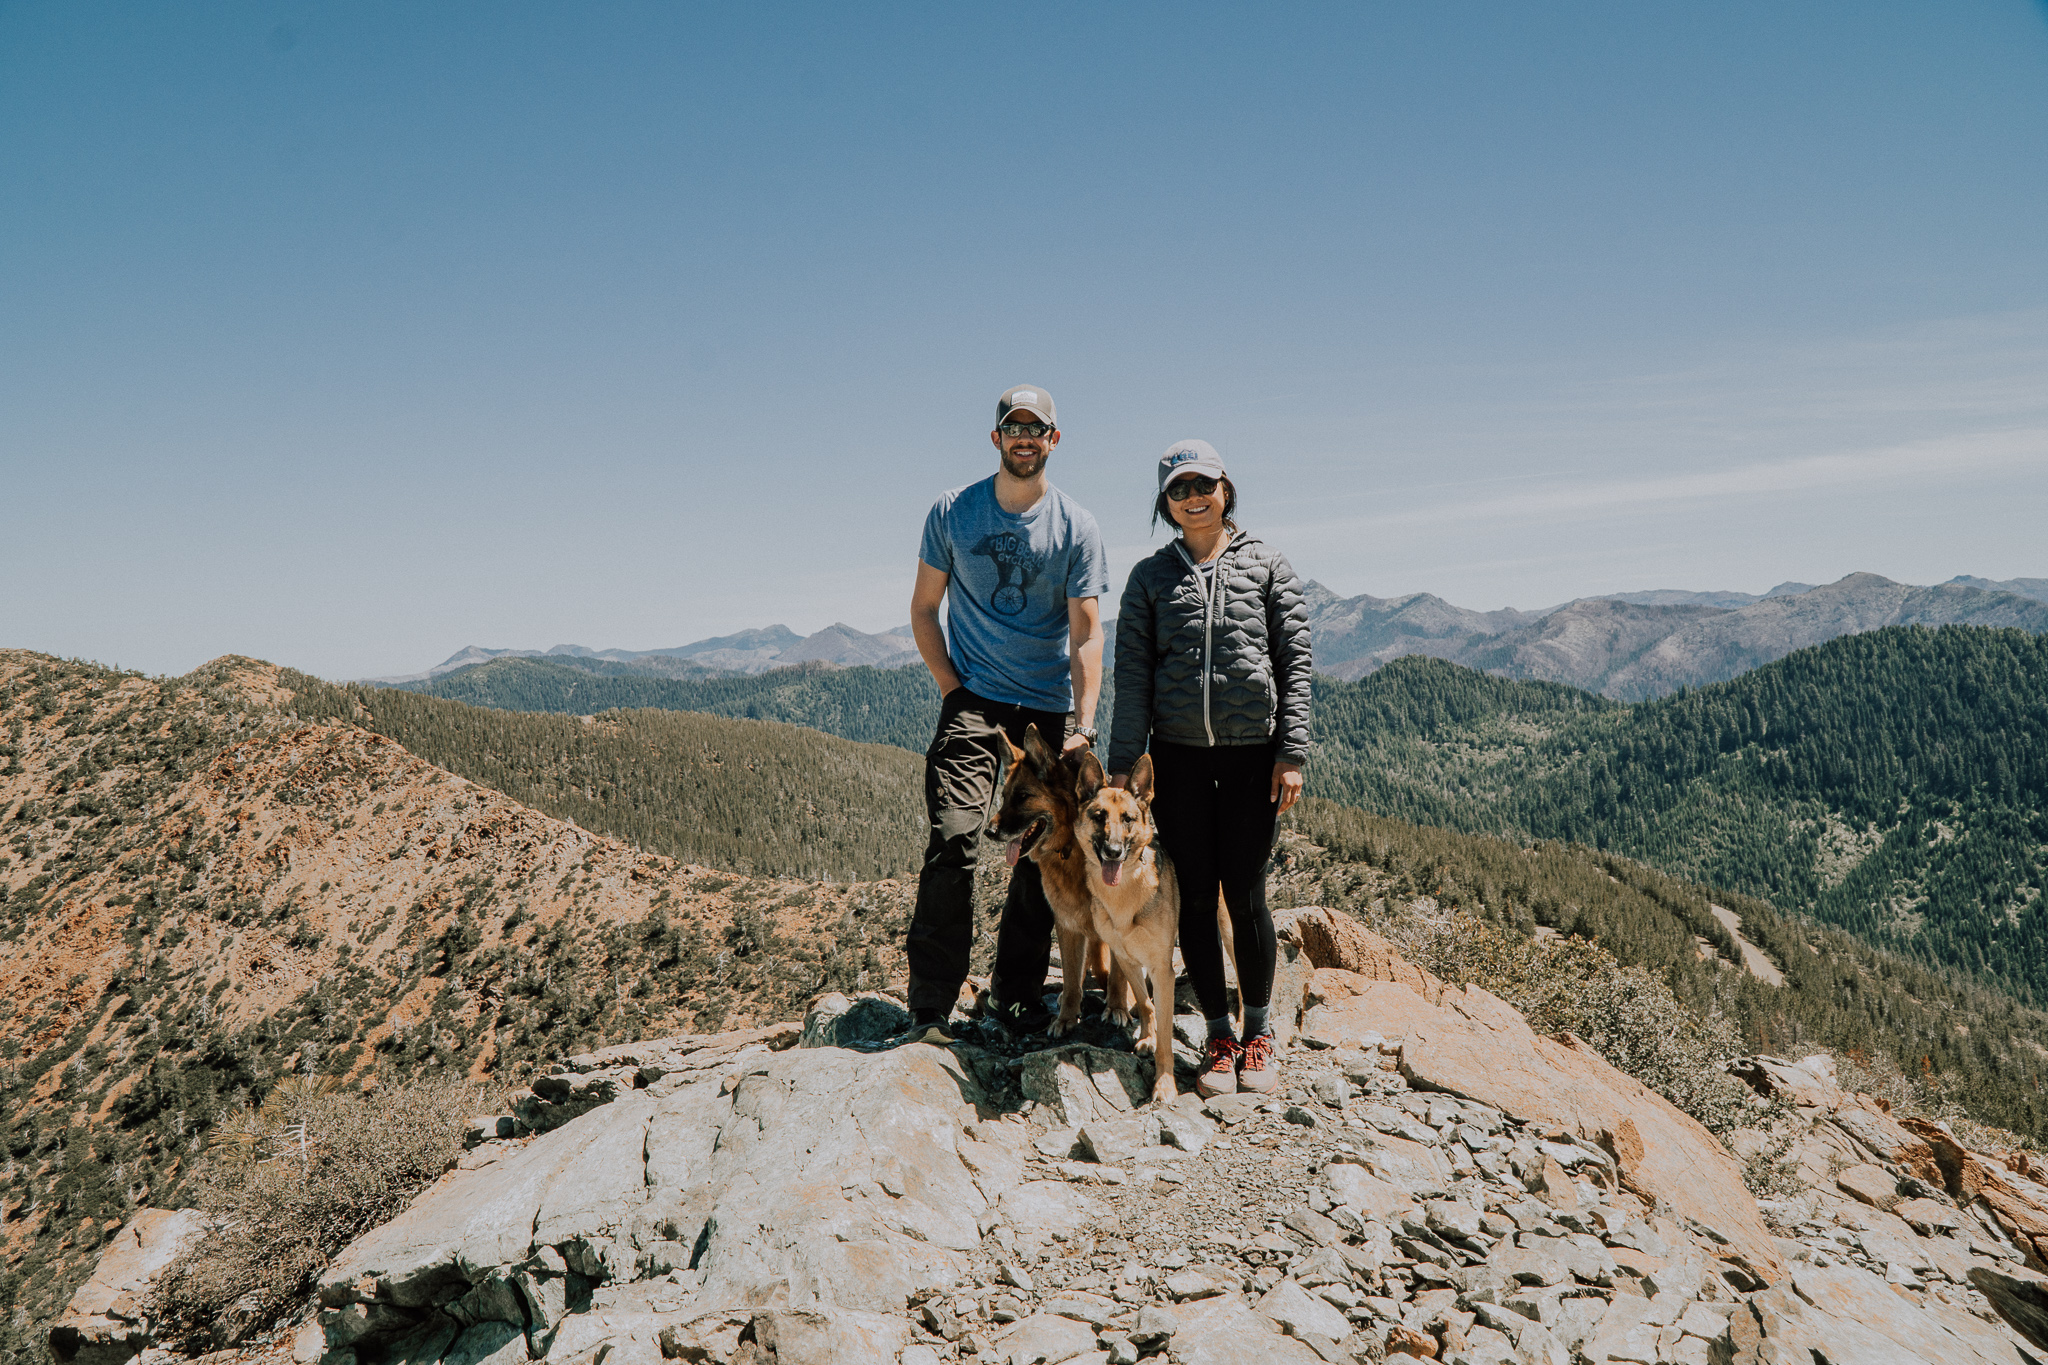 Helen and Tim Travel YouTube Travel Vloggers: See the world one mountain at a time. Helen and Tim with their two german shepherd dogs on a hike